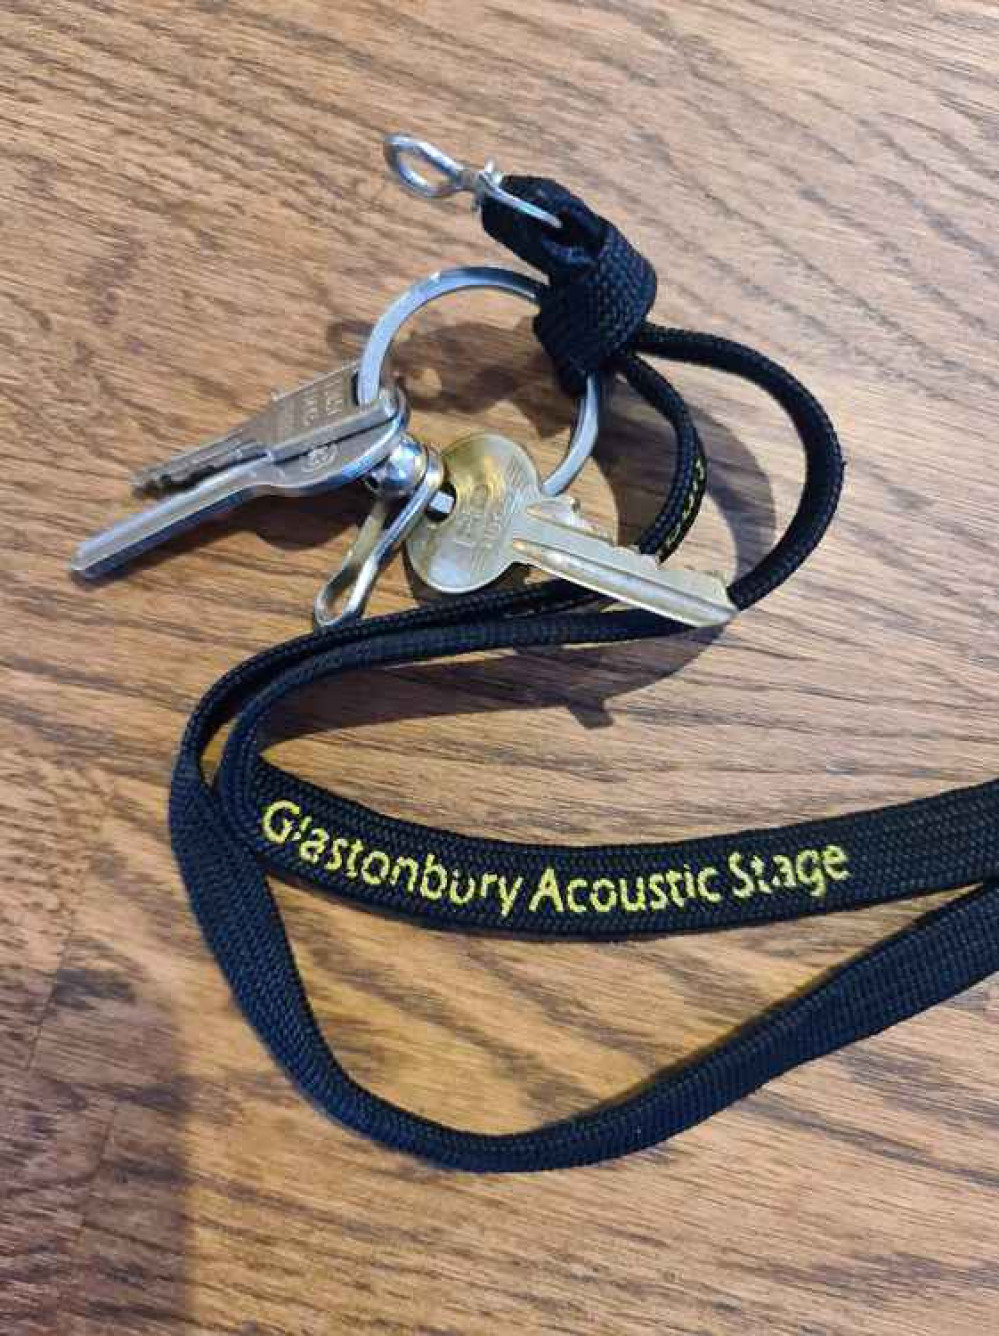 The lanyard from the keys appears to show the owner had some links with the Glastonbury Festival